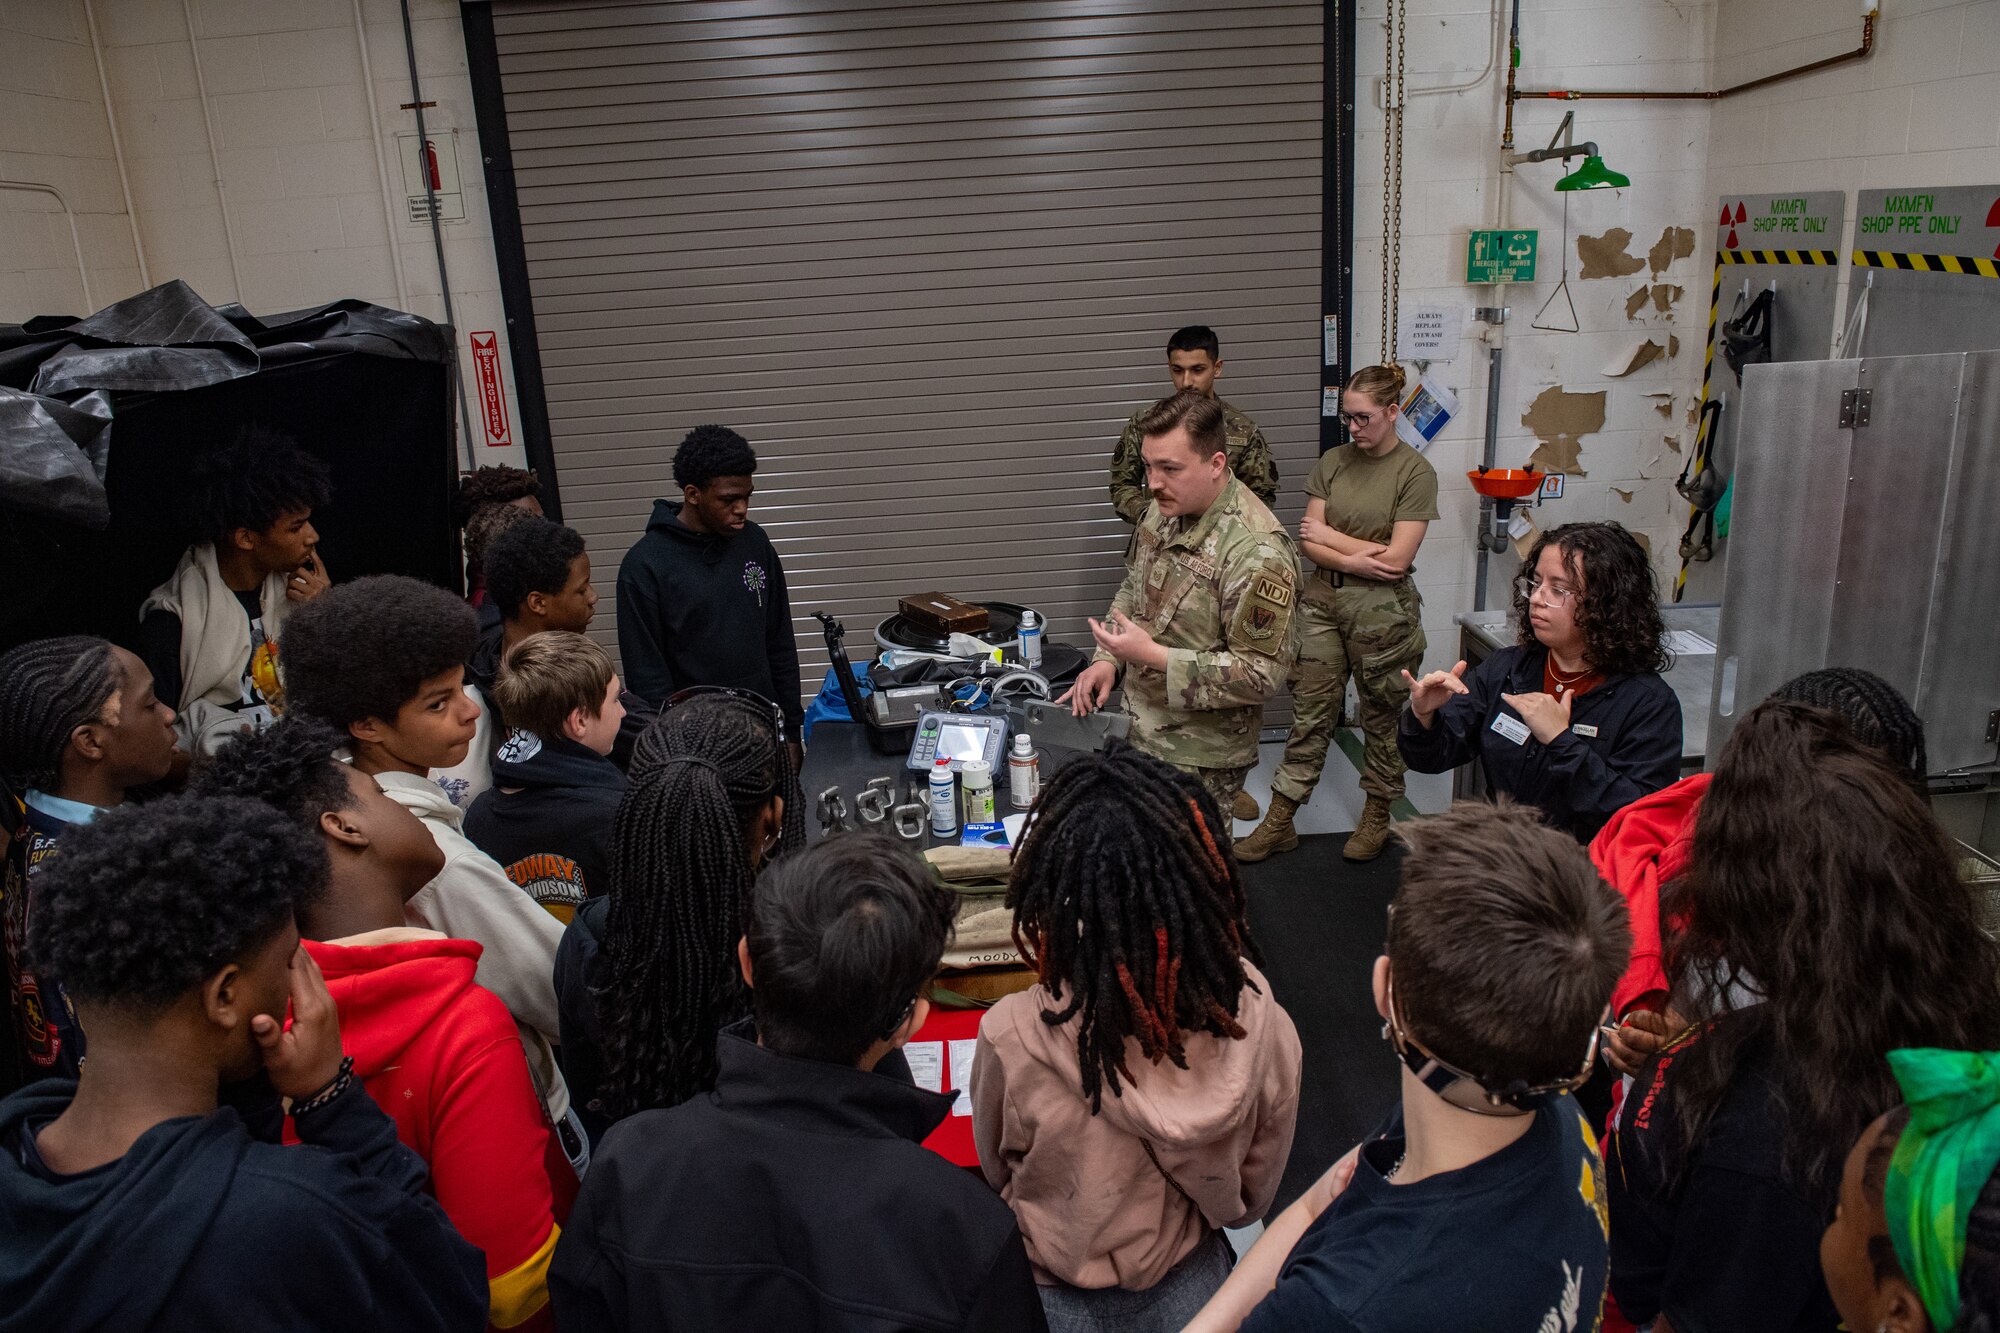 U.S. Air Force Tech. Sgt. Cody Dickerson, 23rd Maintenance Squadron nondestructive inspection supervisor, speaks to Valdosta Middle School students at Moody Air Force Base, Georgia, March 15, 2024. The students visited Moody AFB during Women in Aviation Week to learn about various Air Force specialties in the 23rd Wing and 93rd Air Ground Operations Wing. Team Moody’s annual WIA events aim to highlight aviation-related career fields and inspire local youth to consider futures in the Air Force. (U.S. Air Force photo by Senior Airman Courtney Sebastianelli)